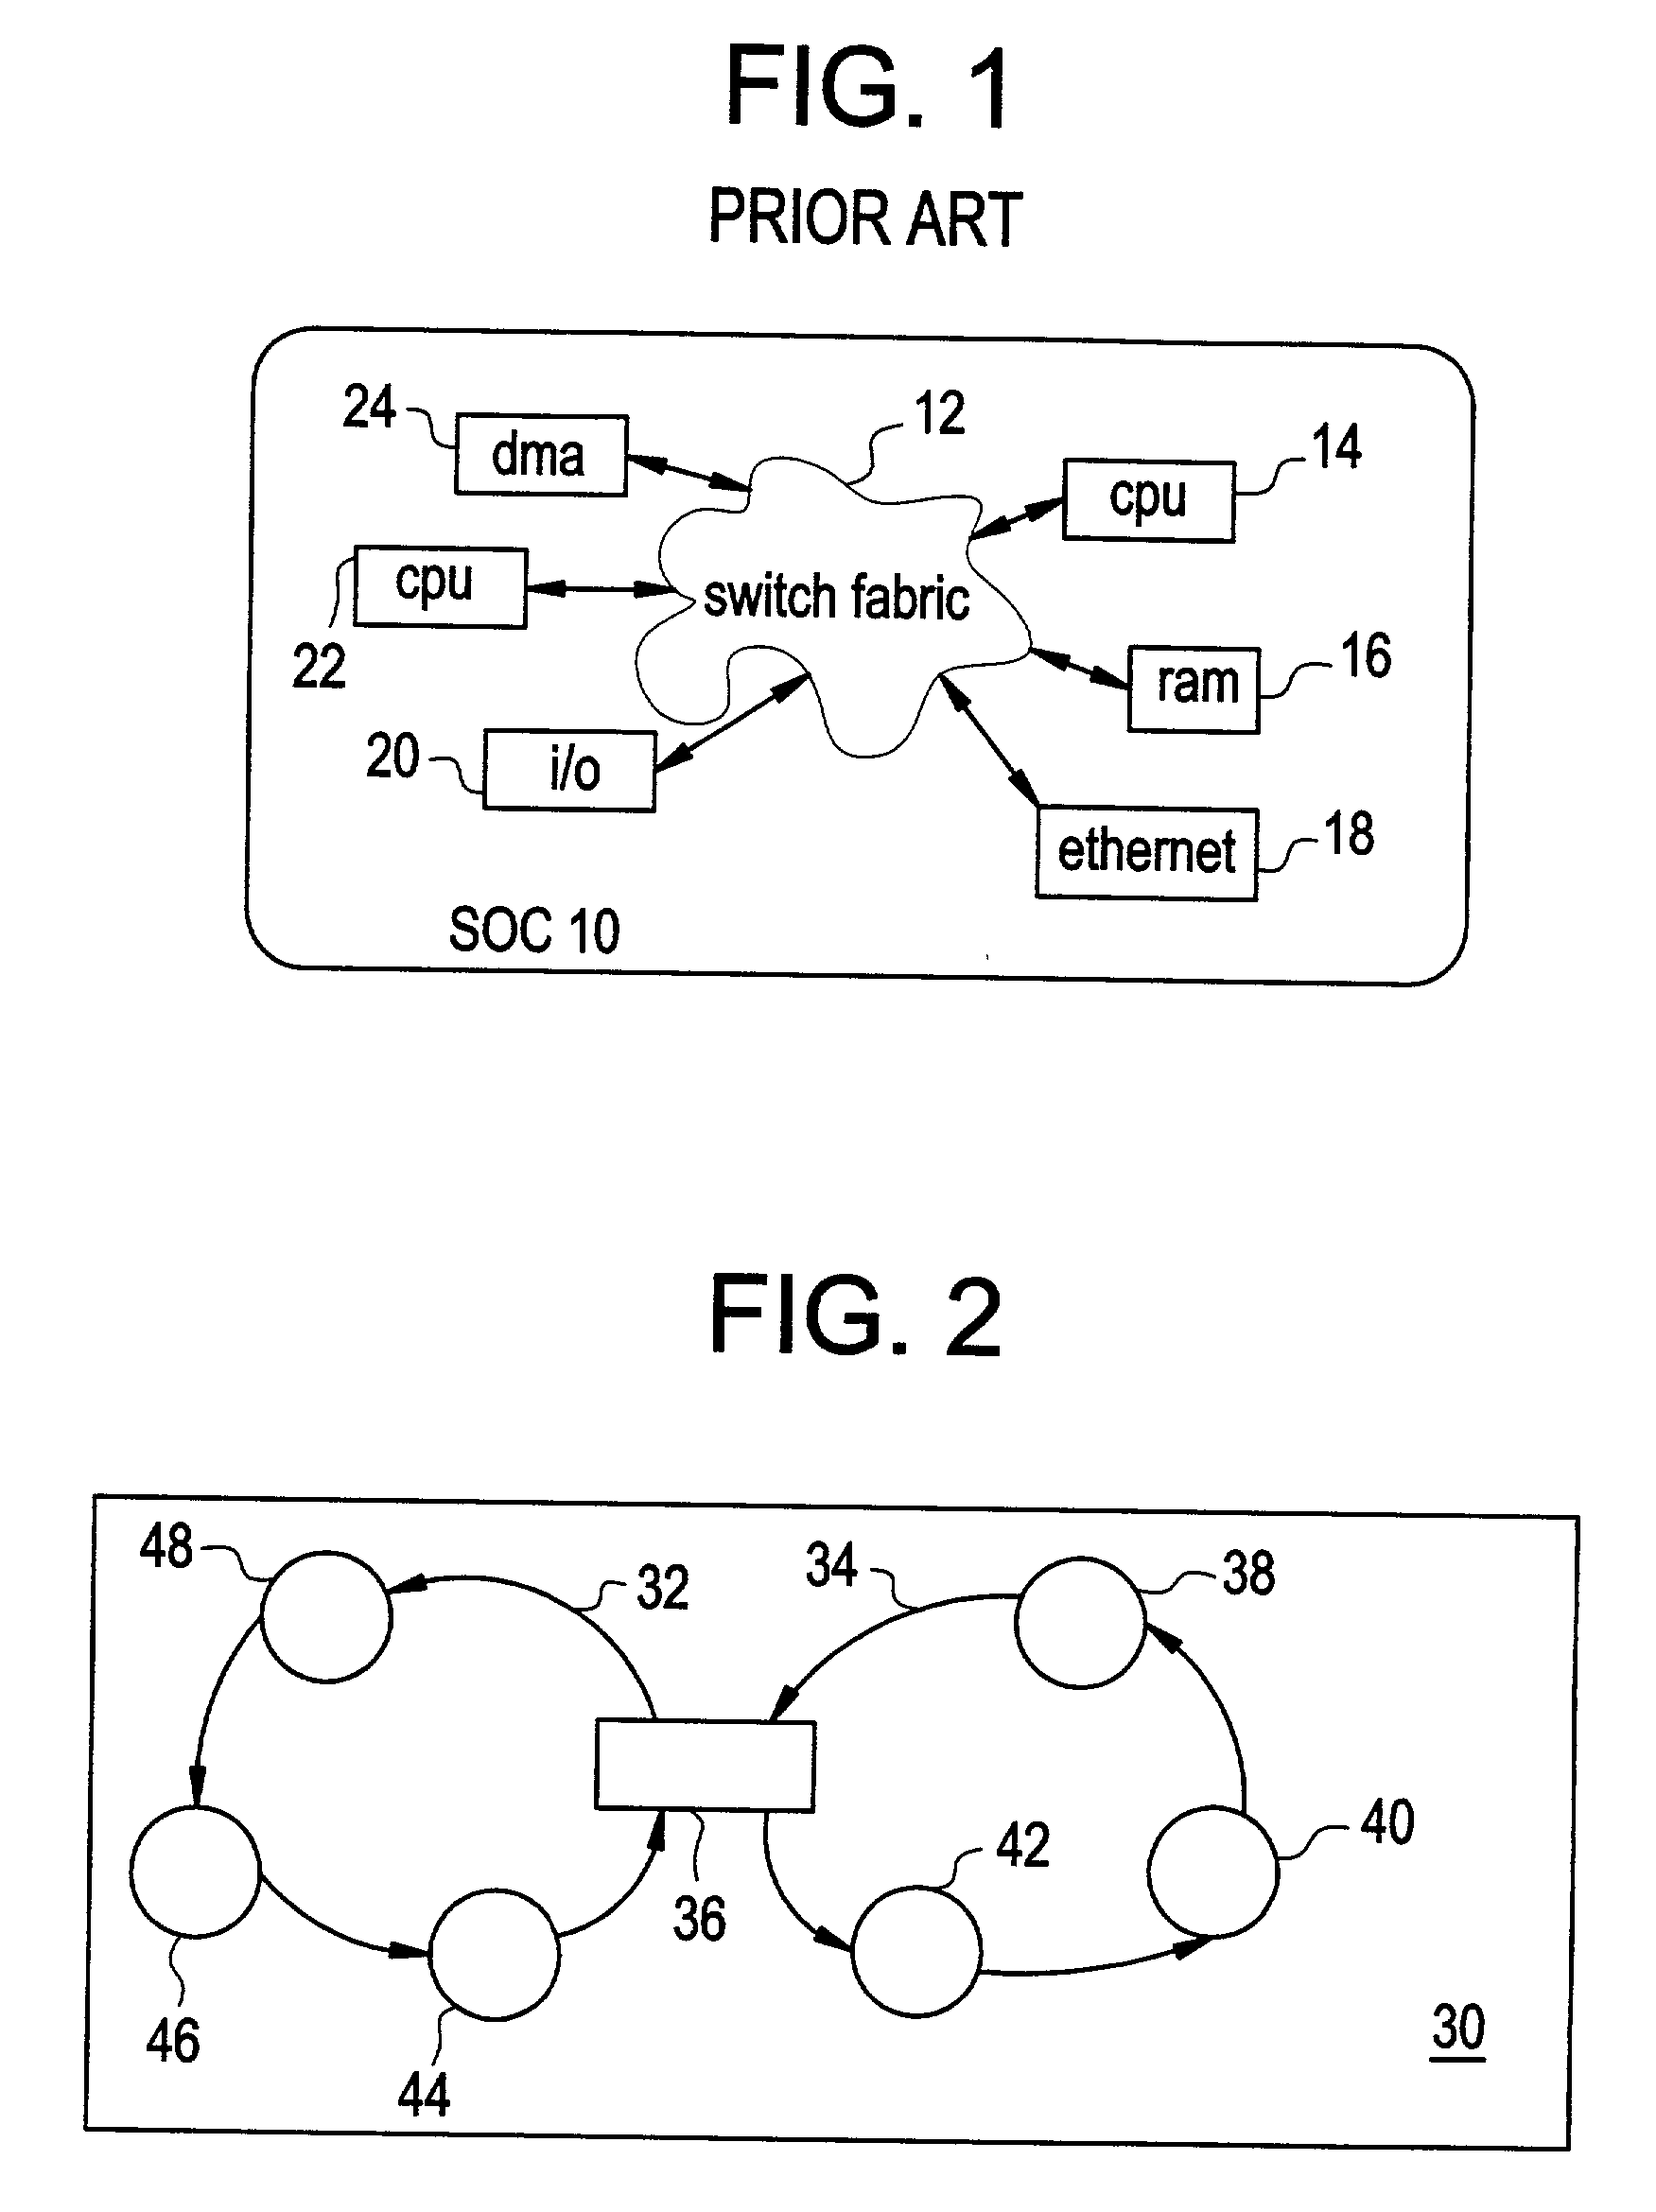 Communications system using rings architecture